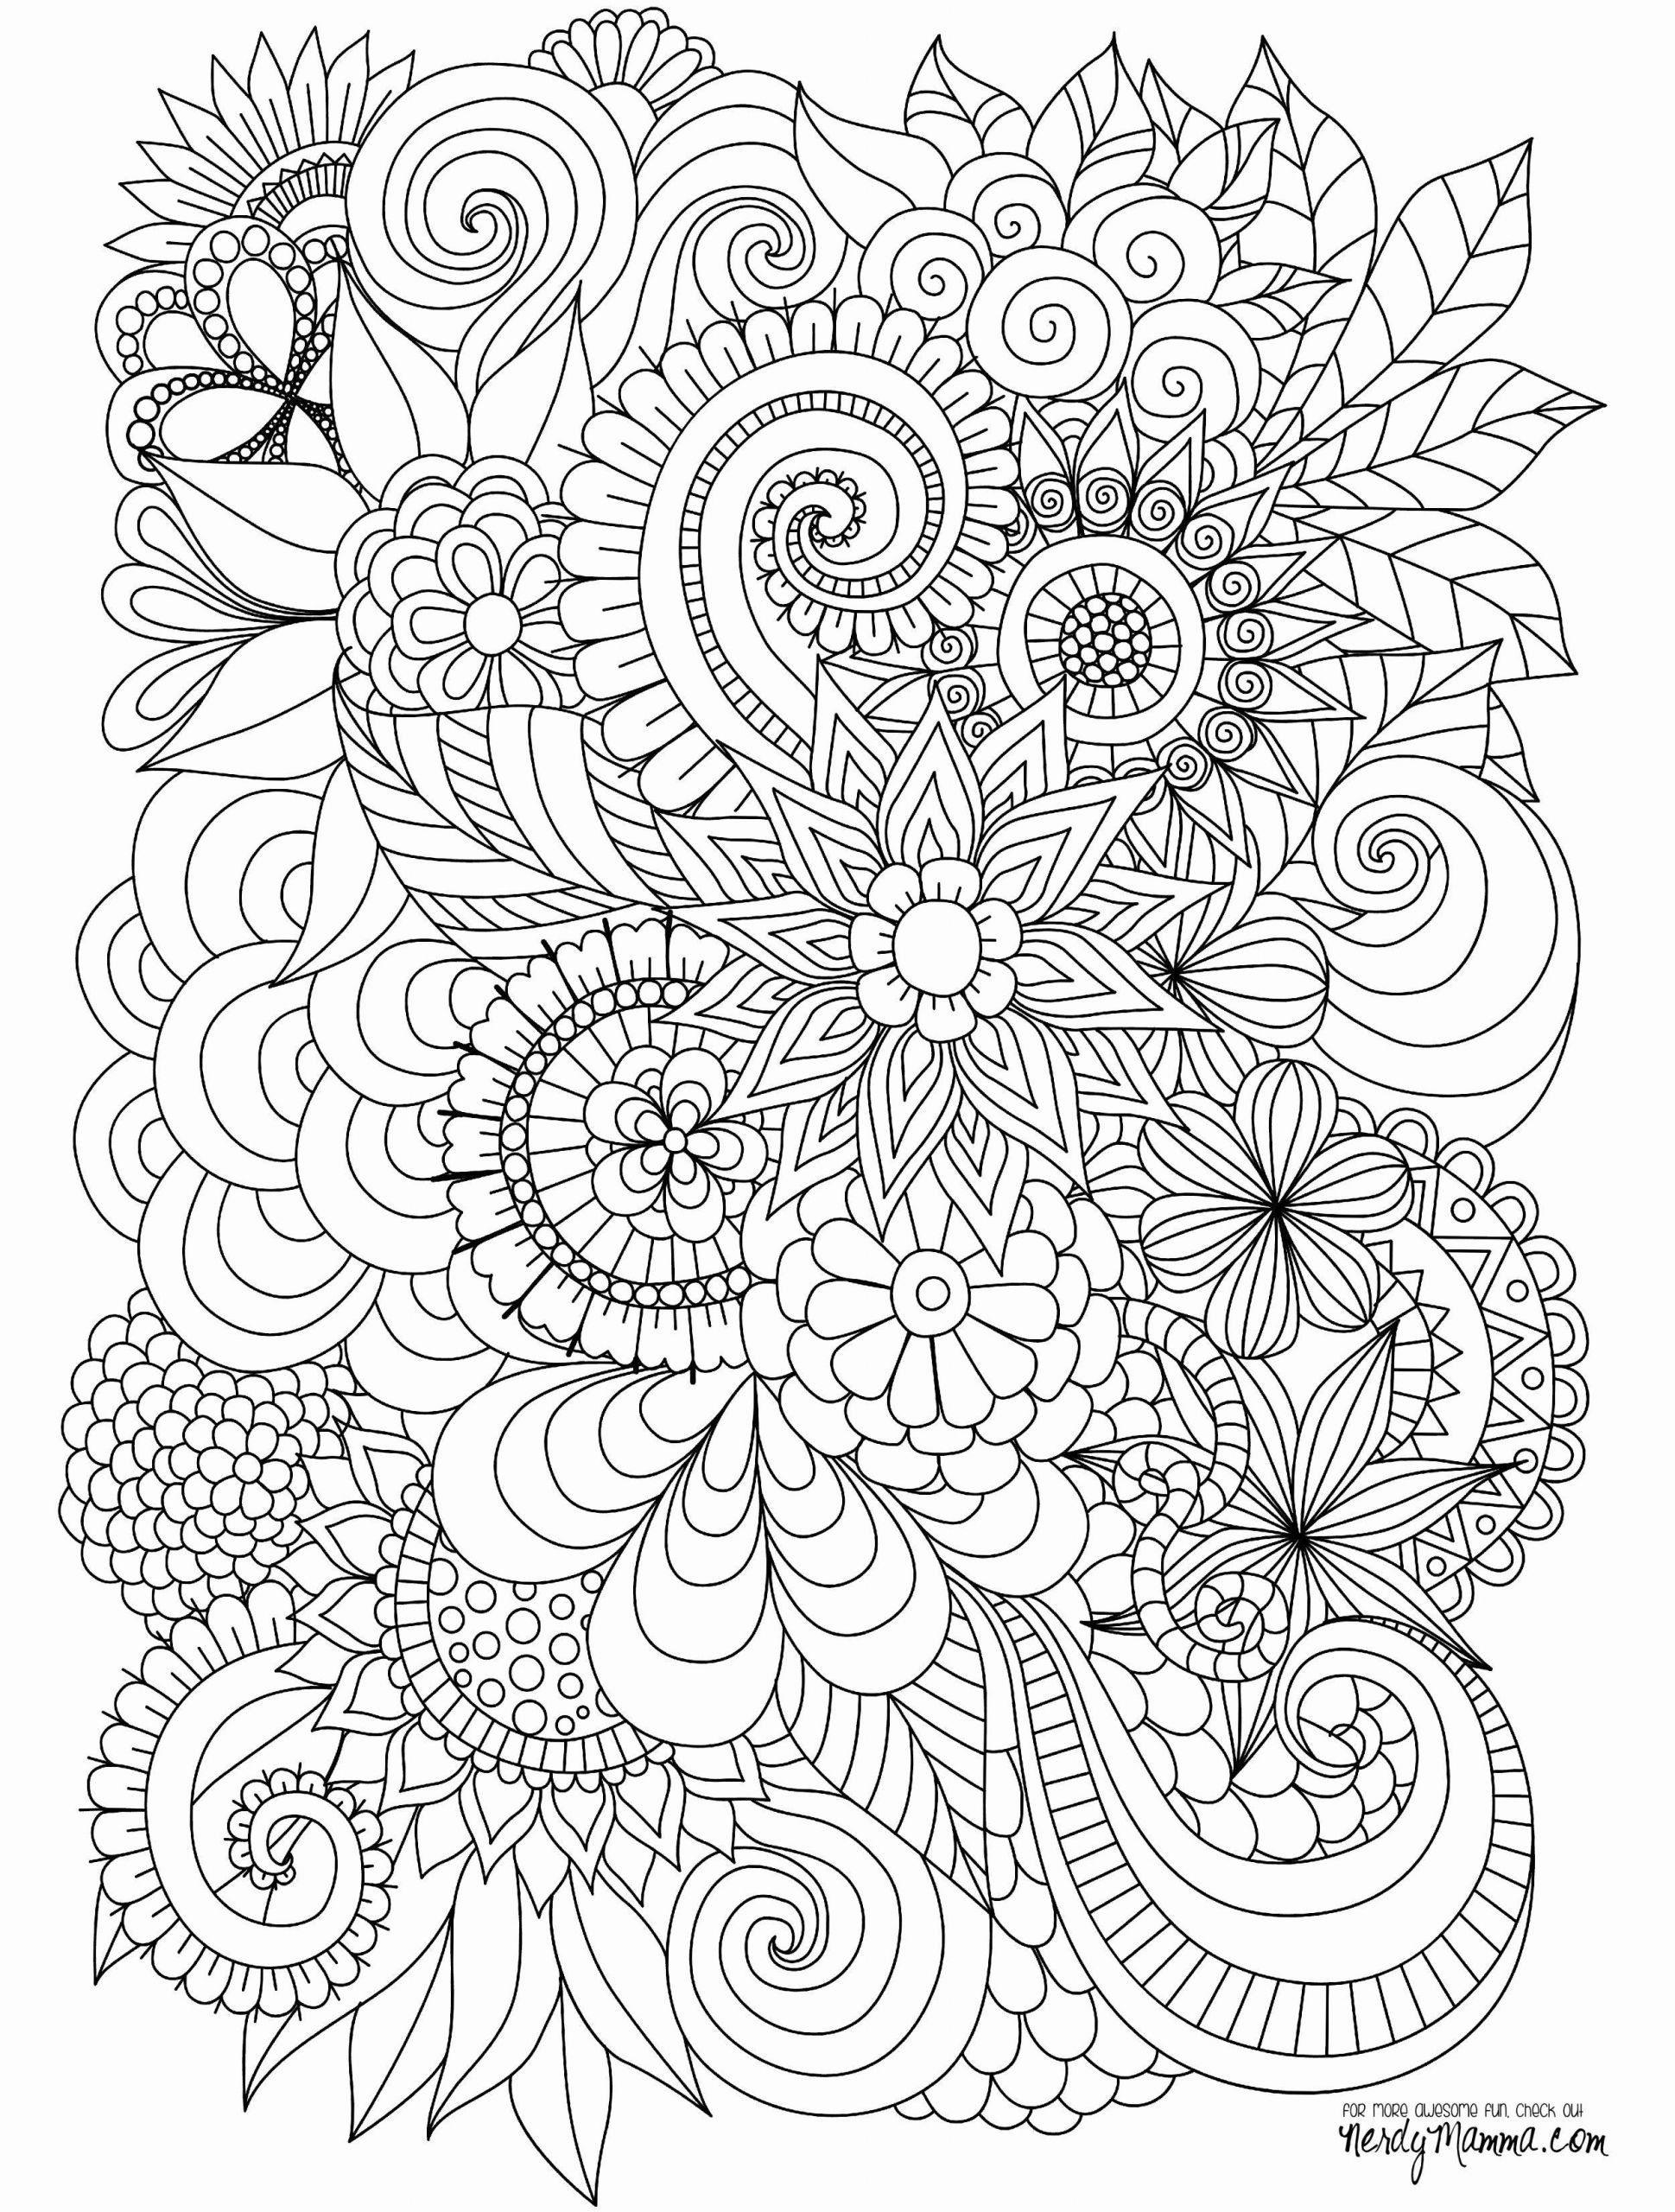 Coloring Pages  Interactive Coloring Pages For Adults Online New ...